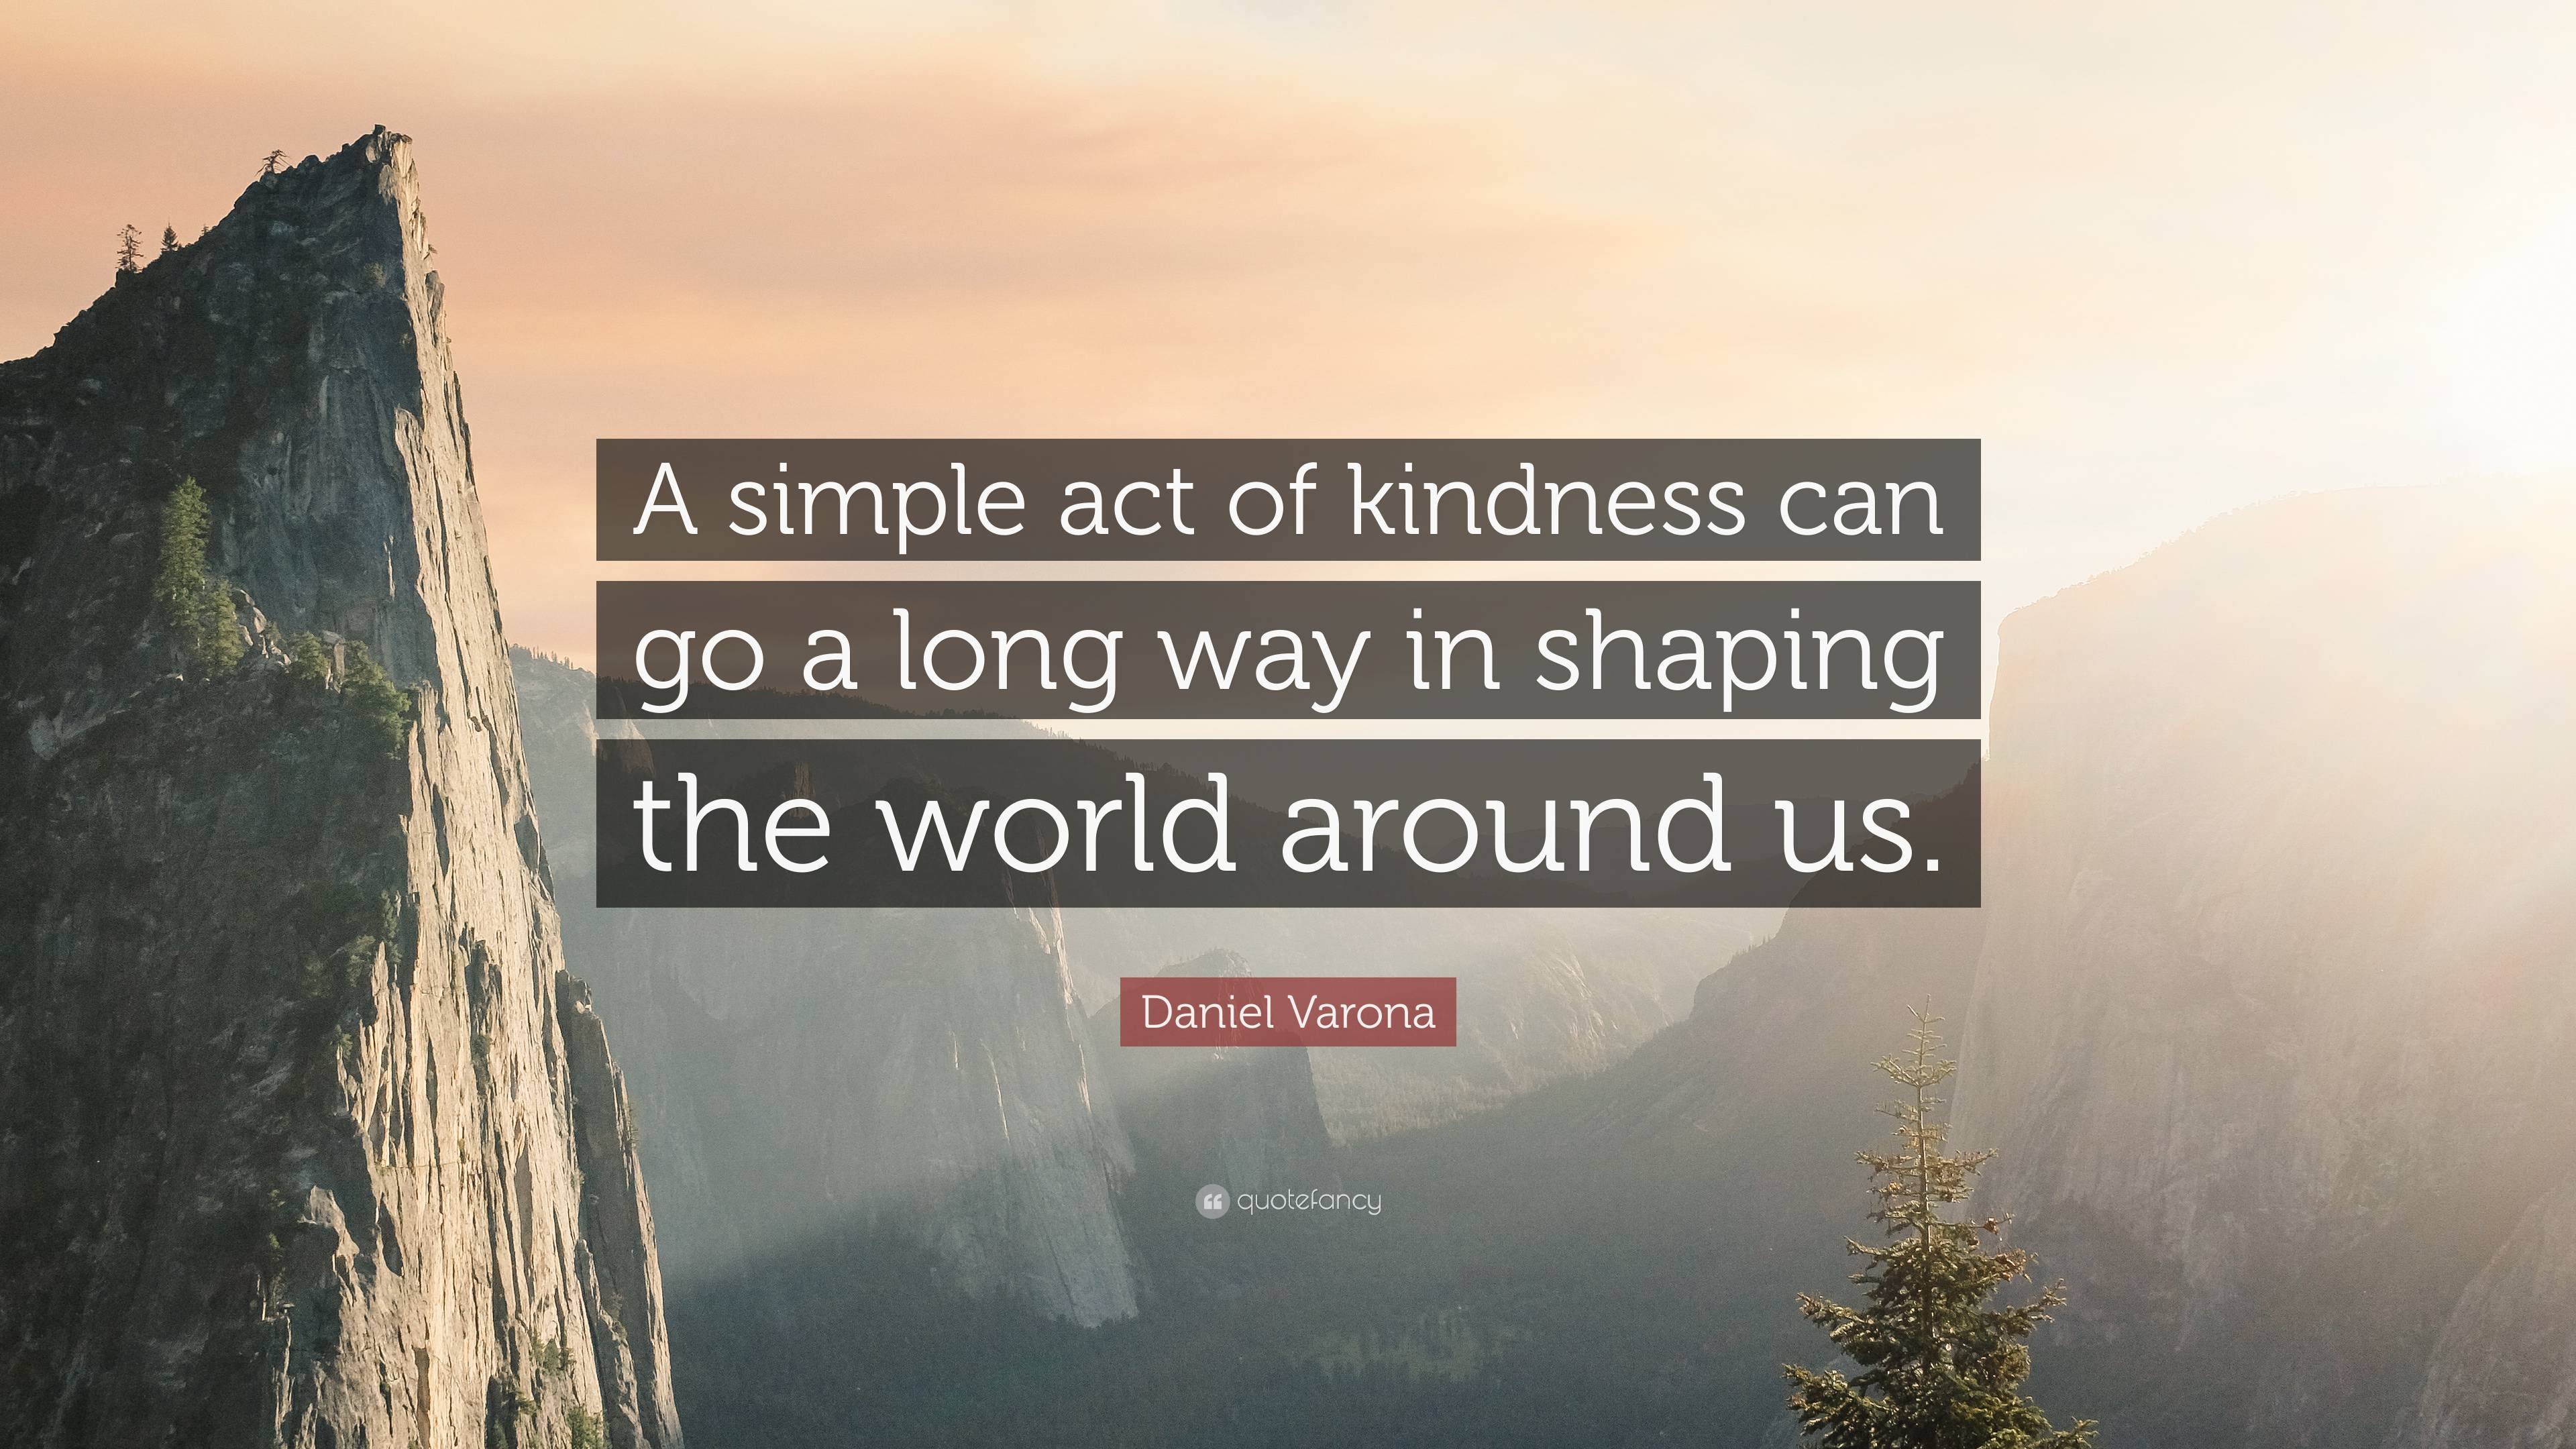 https://quotefancy.com/media/wallpaper/3840x2160/7527120-Daniel-Varona-Quote-A-simple-act-of-kindness-can-go-a-long-way-in.jpg